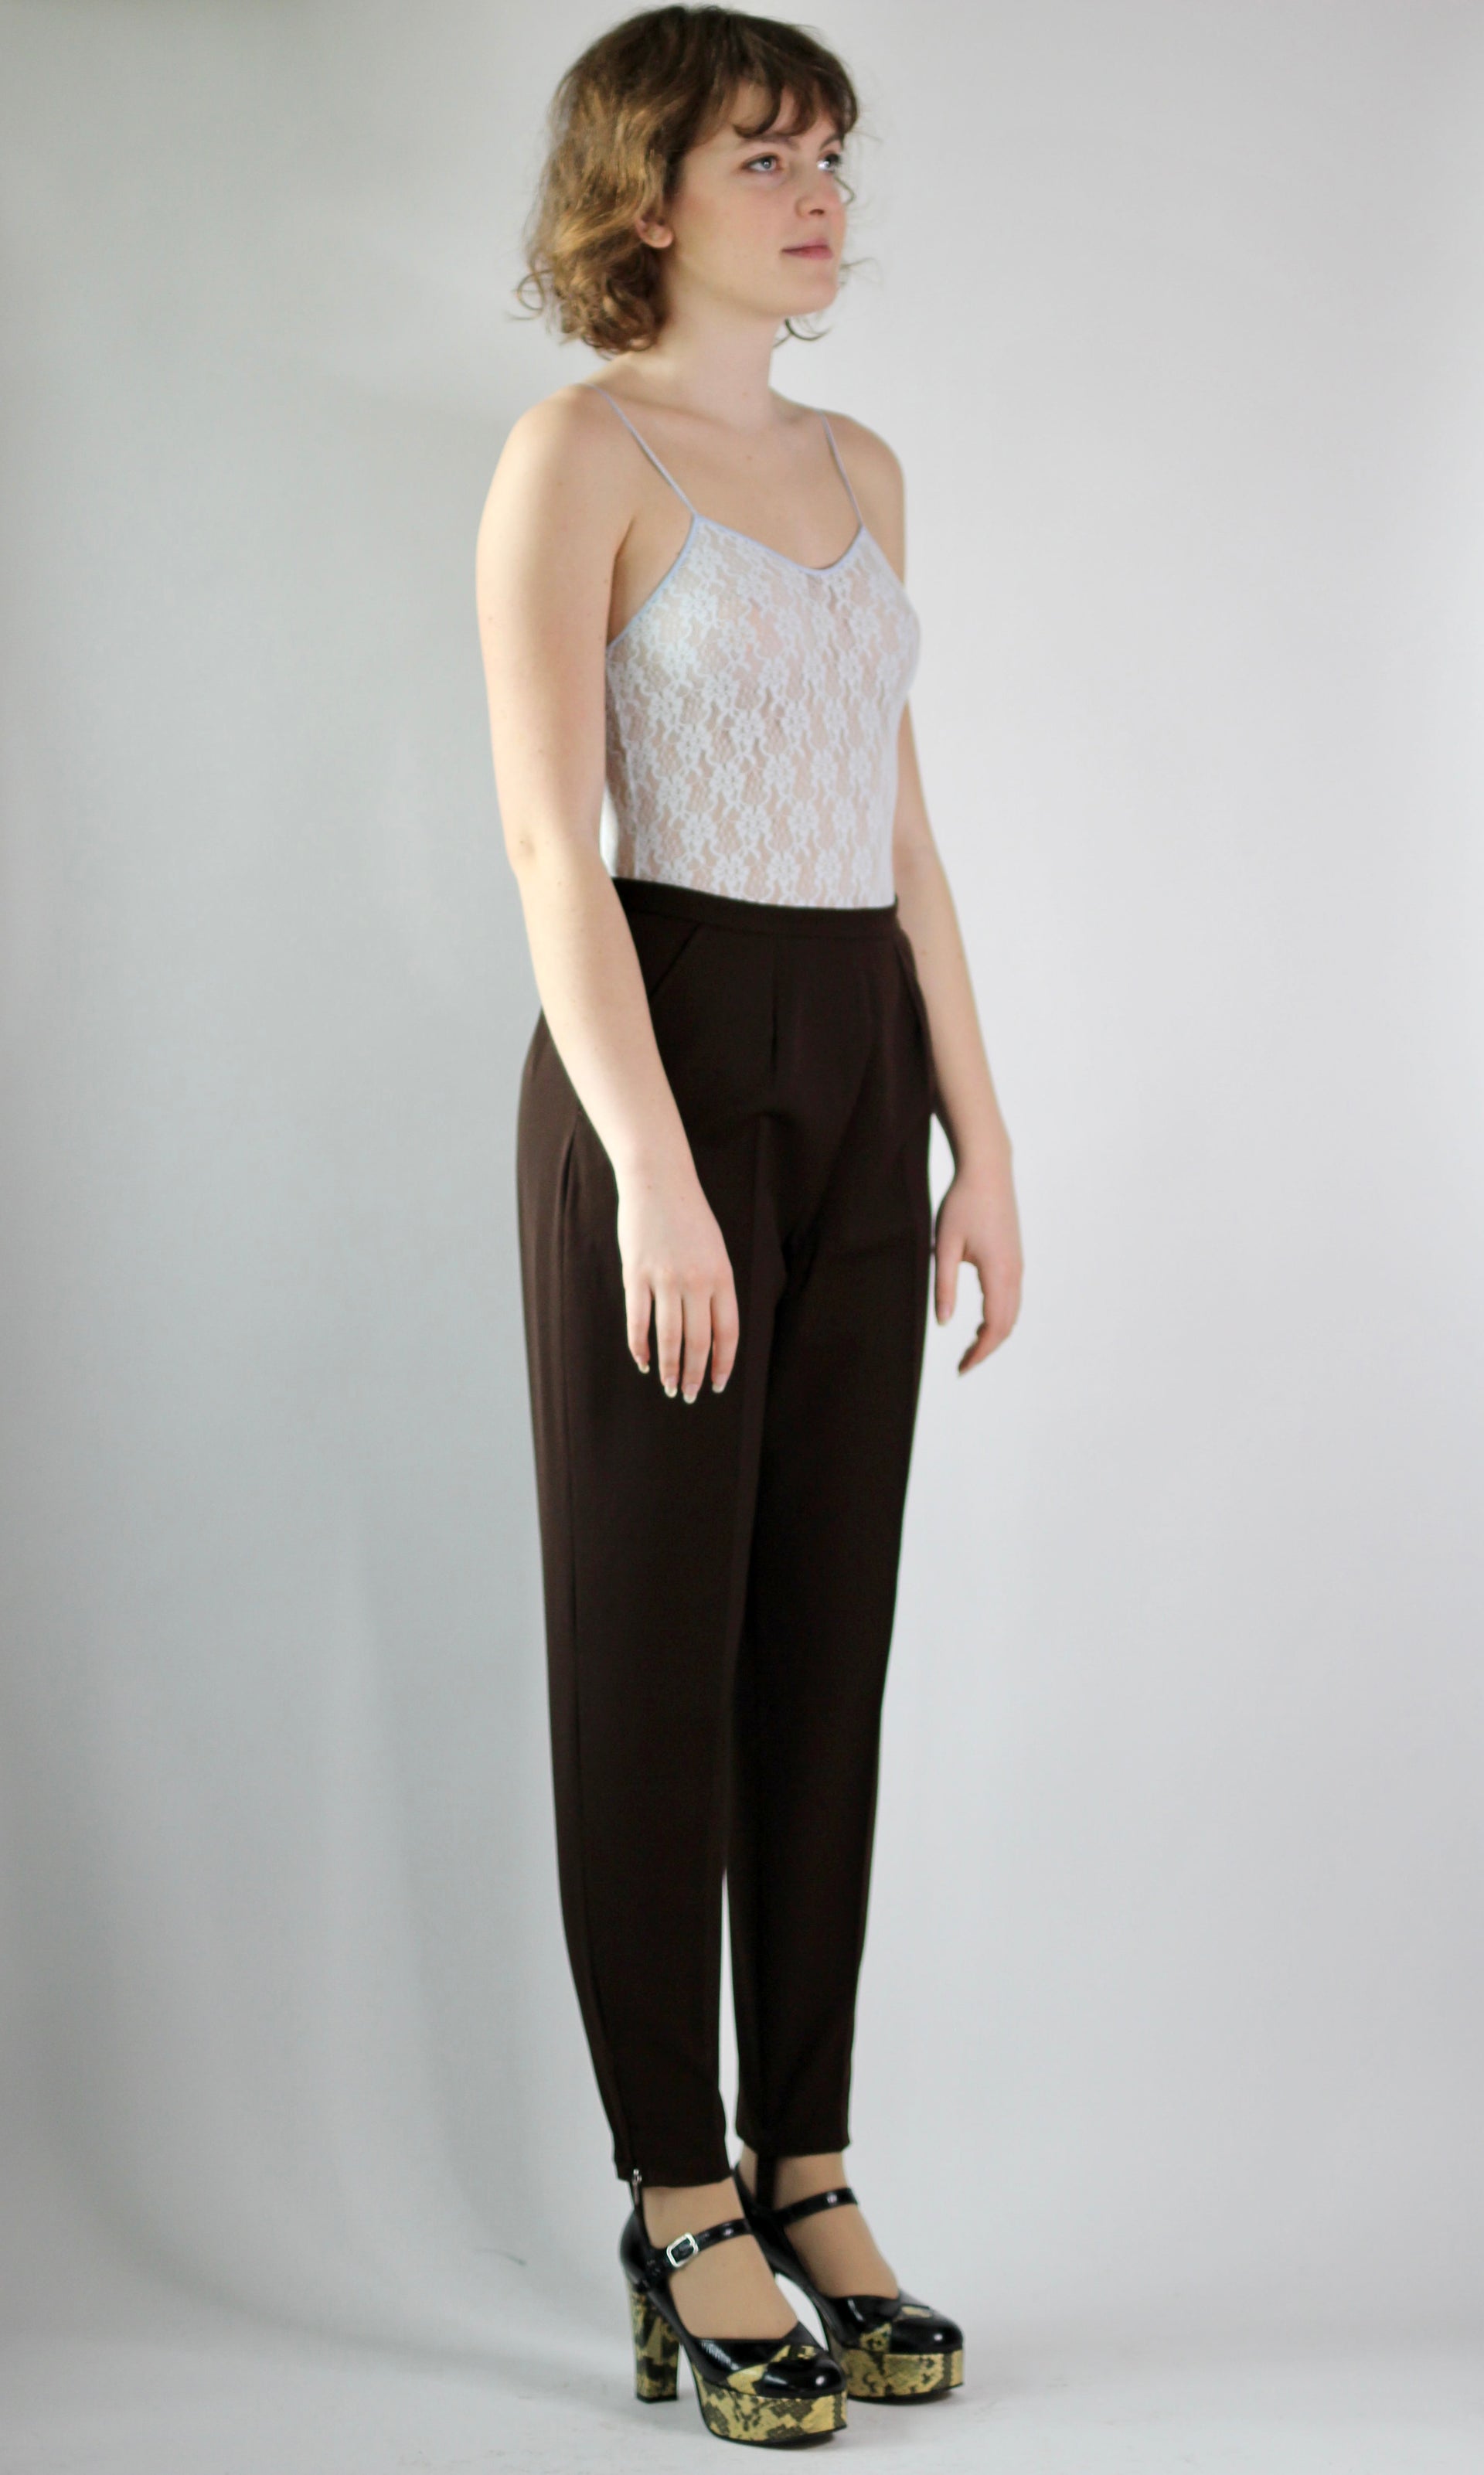 1950s 1960s Womans High Waisted Brown Pants//Size M